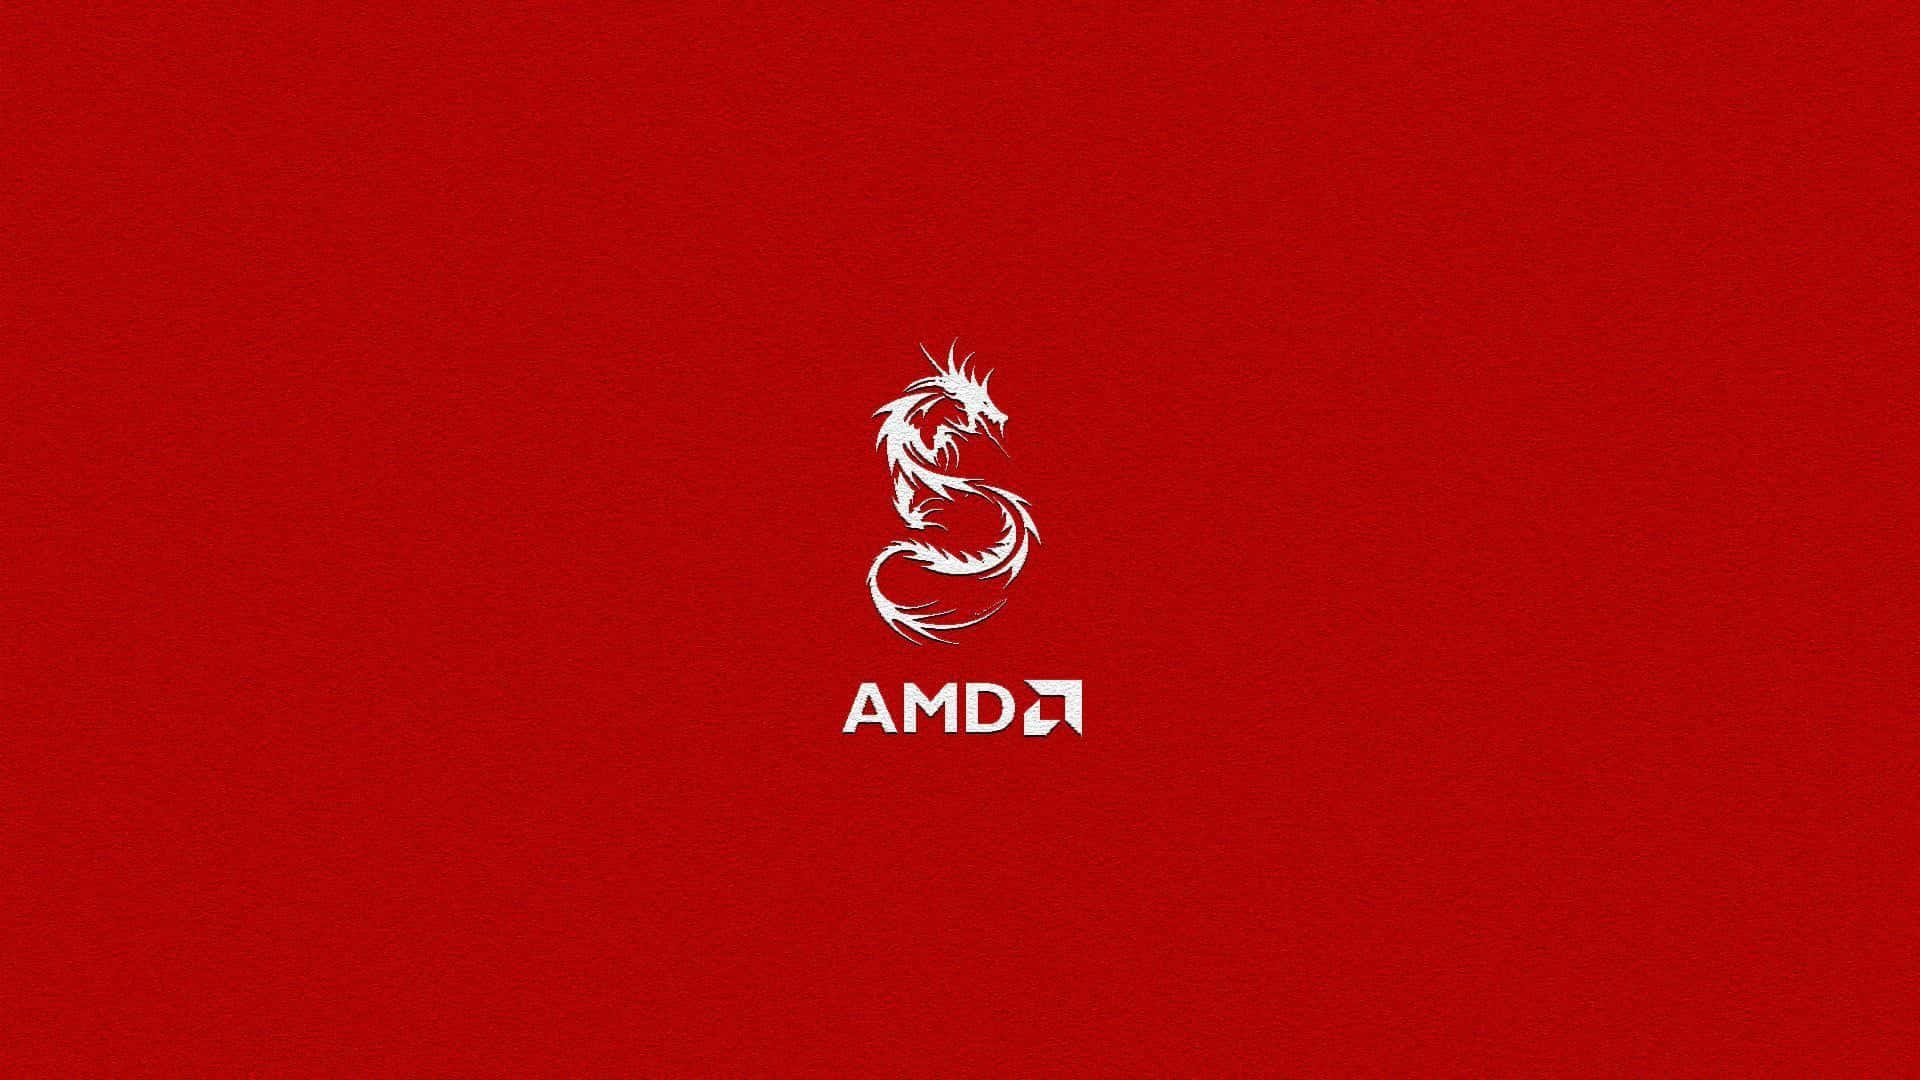 Up Your Game With AMD Radeon Wallpaper